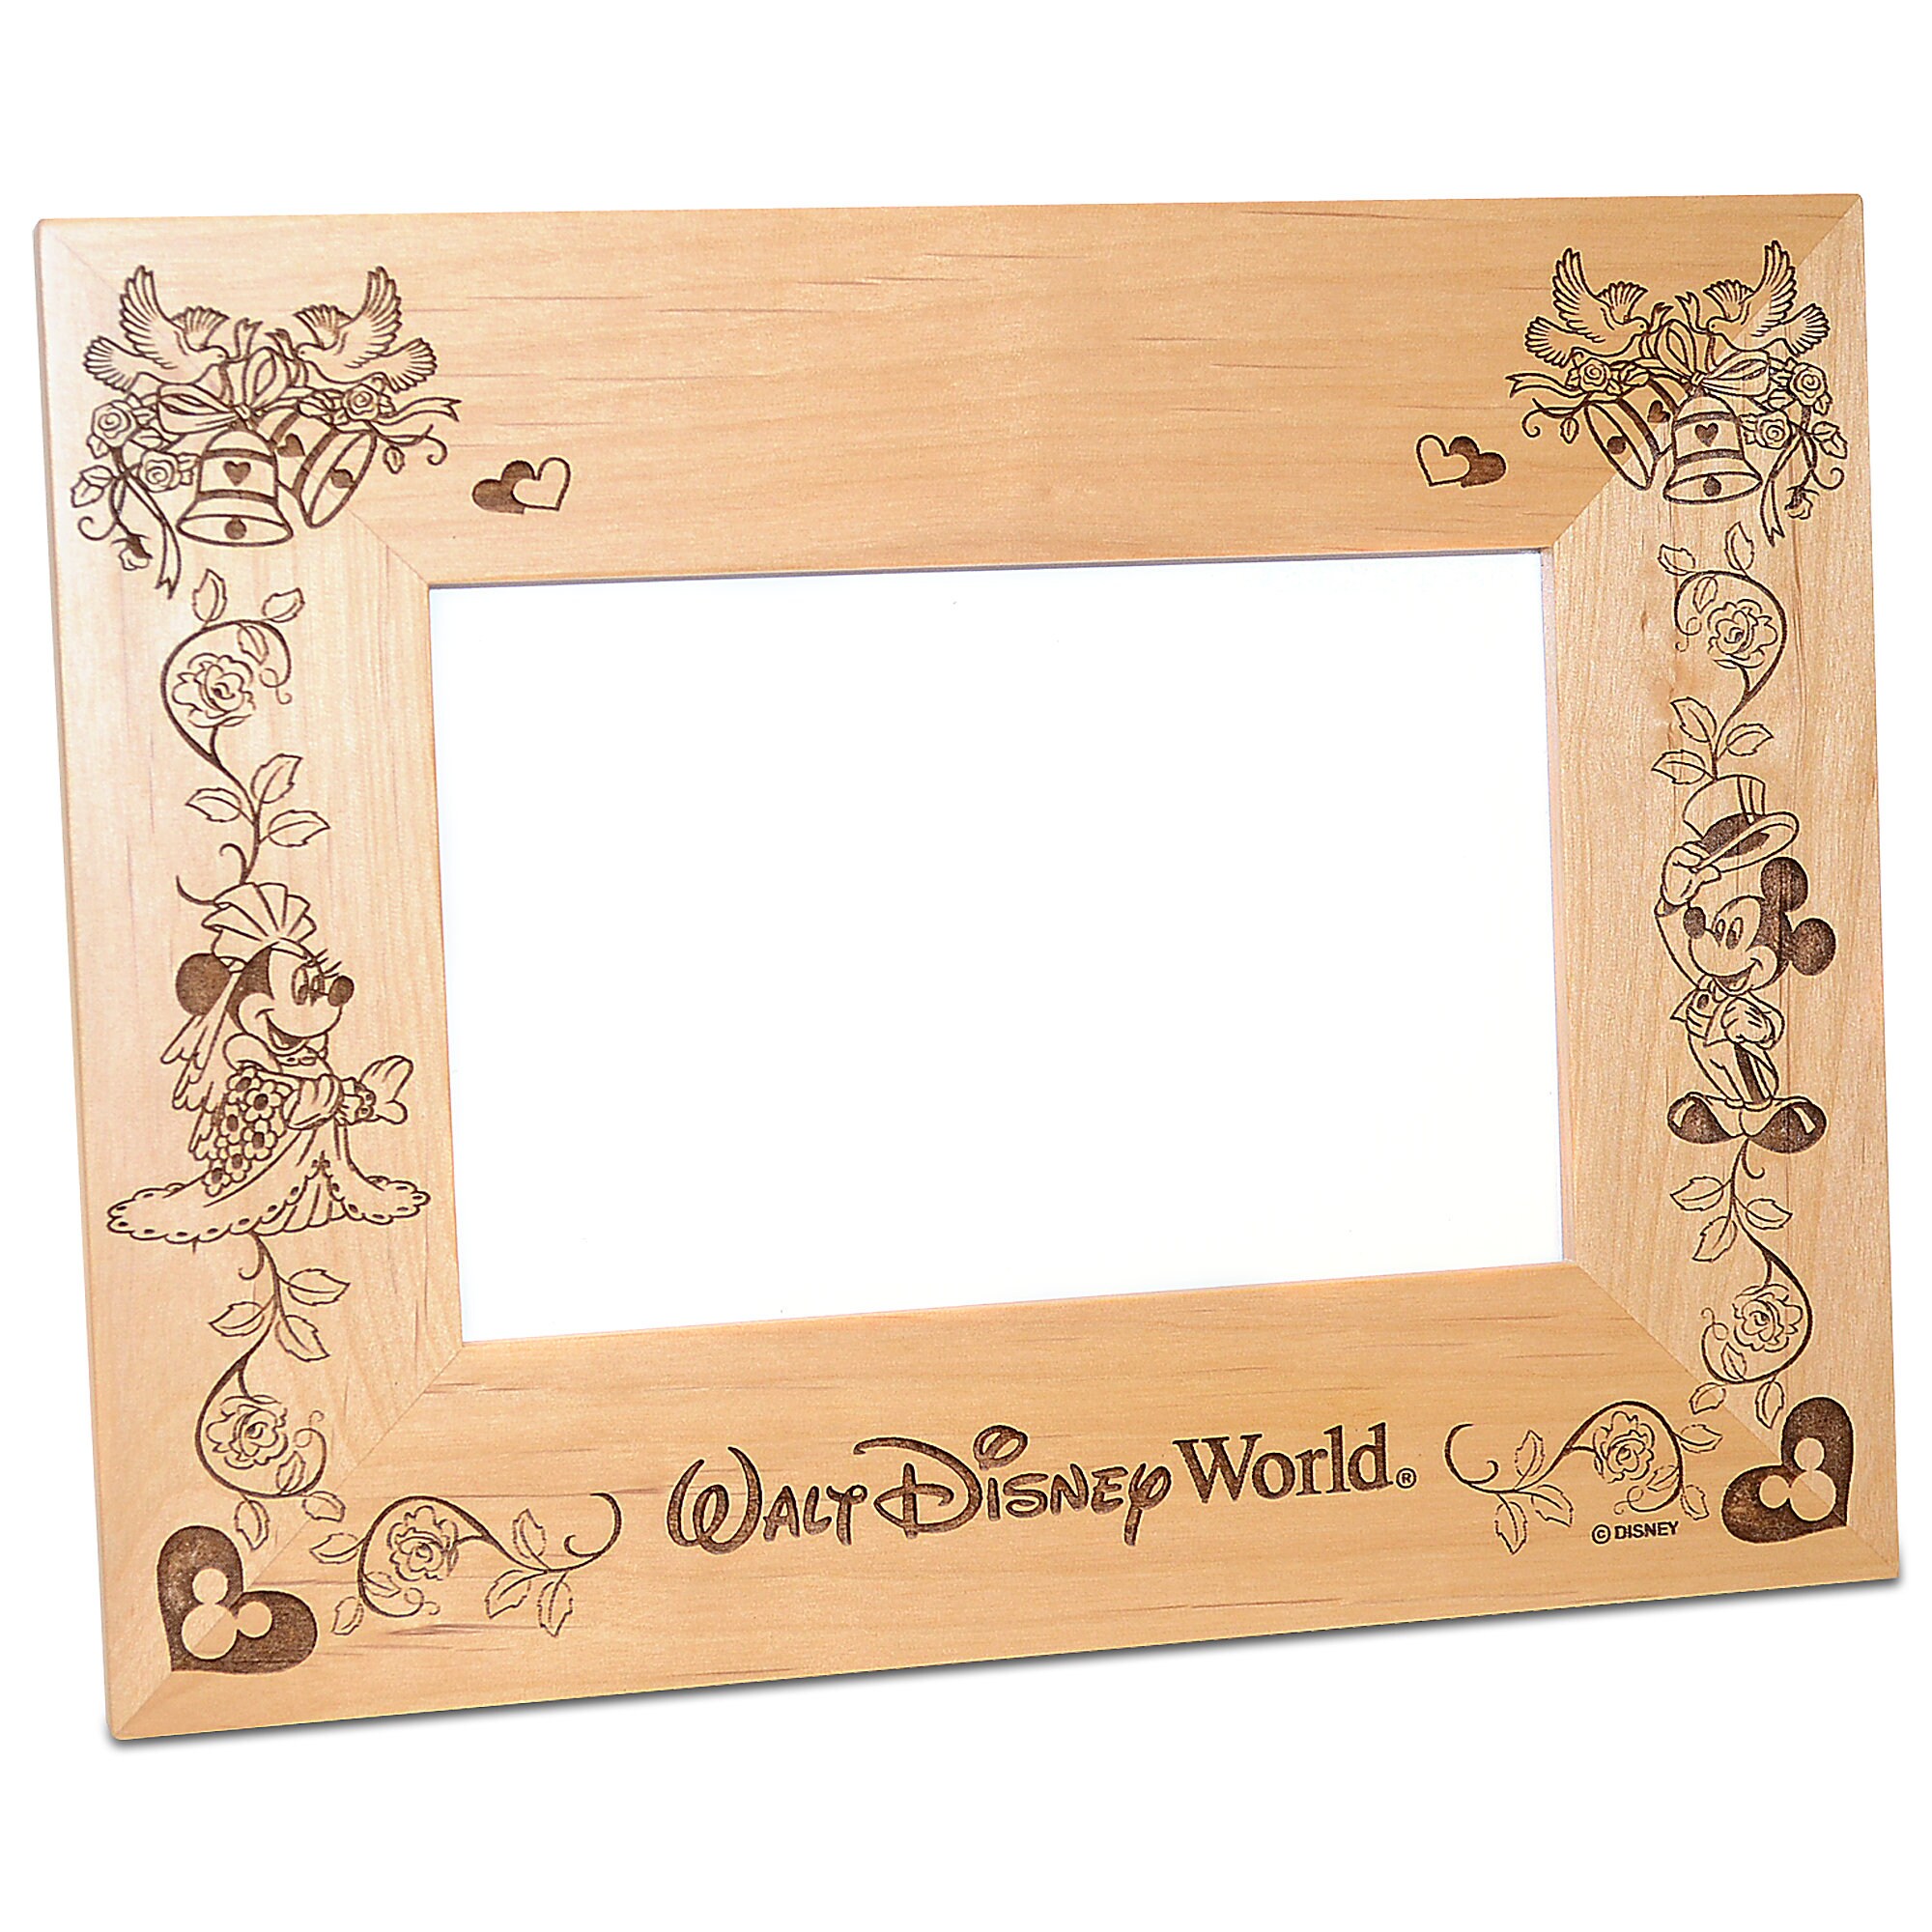 Walt Disney World Minnie and Mickey Mouse Wedding Photo Frame by Arribas - Personalizable